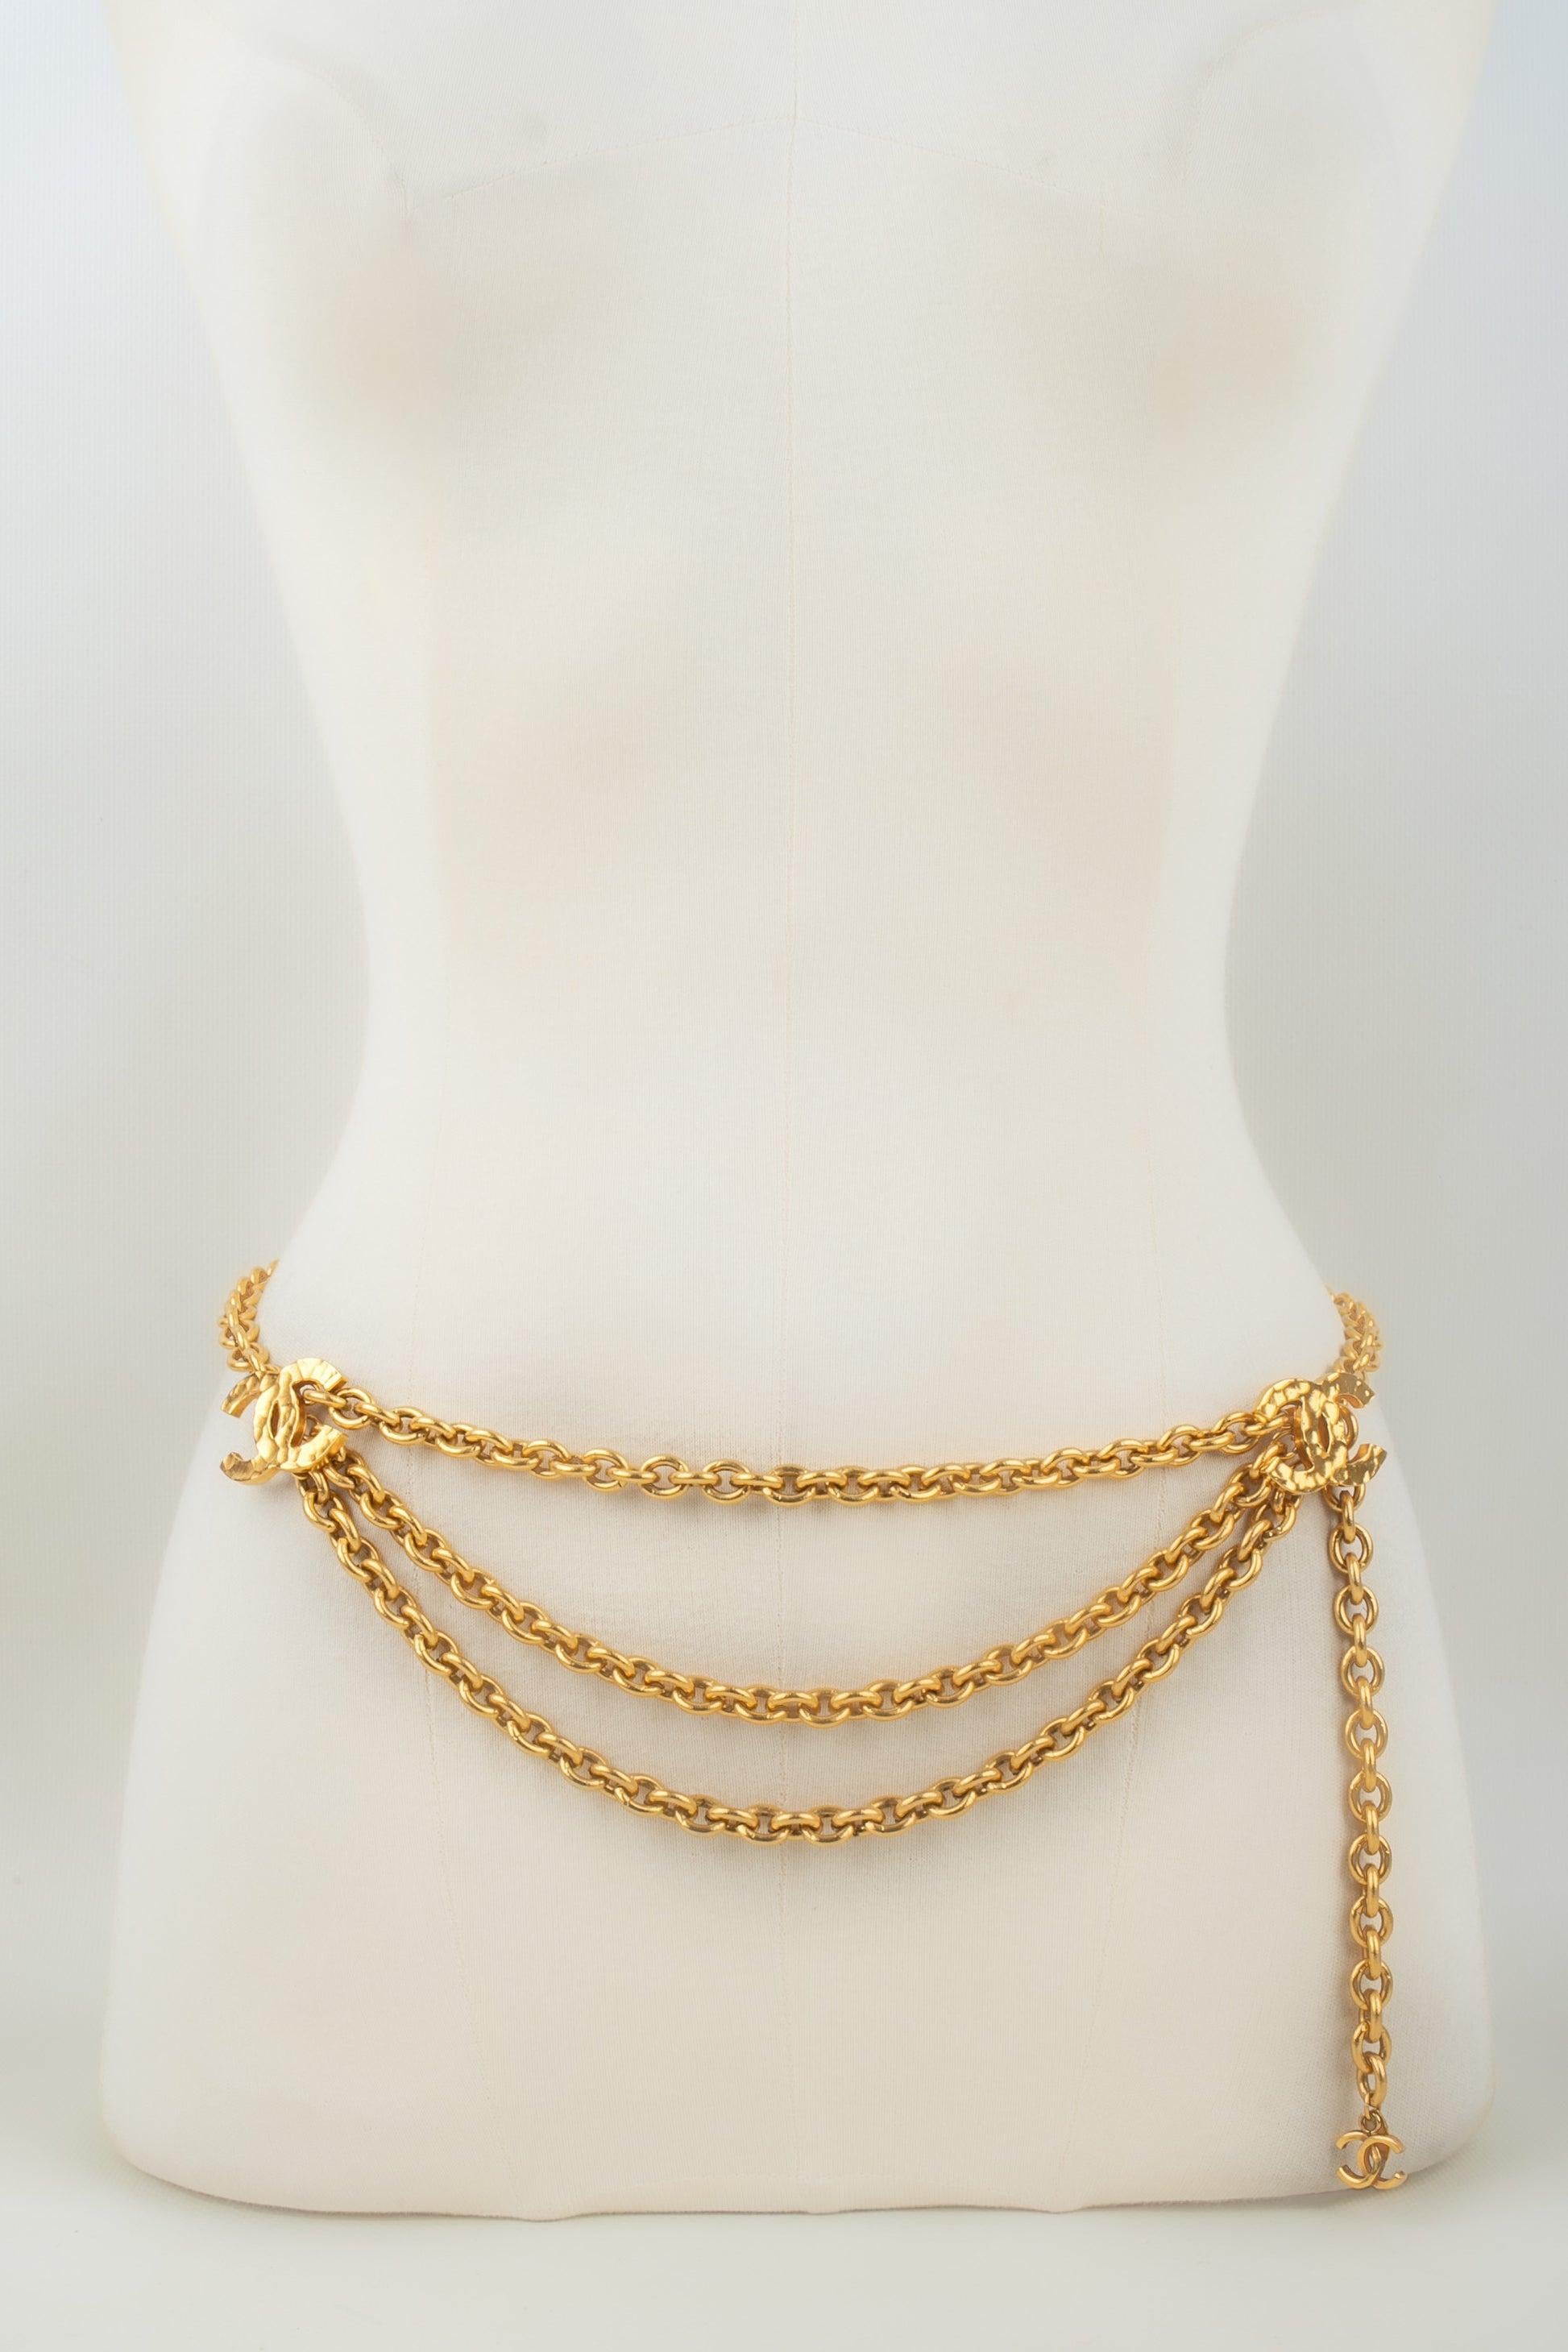 Chanel - (Made in France) Golden metal chain belt from the 1980s.

Additional information:
Condition: Very good condition
Dimensions: Length: 85 cm
Period: 20th Century

Seller Reference: CCB16